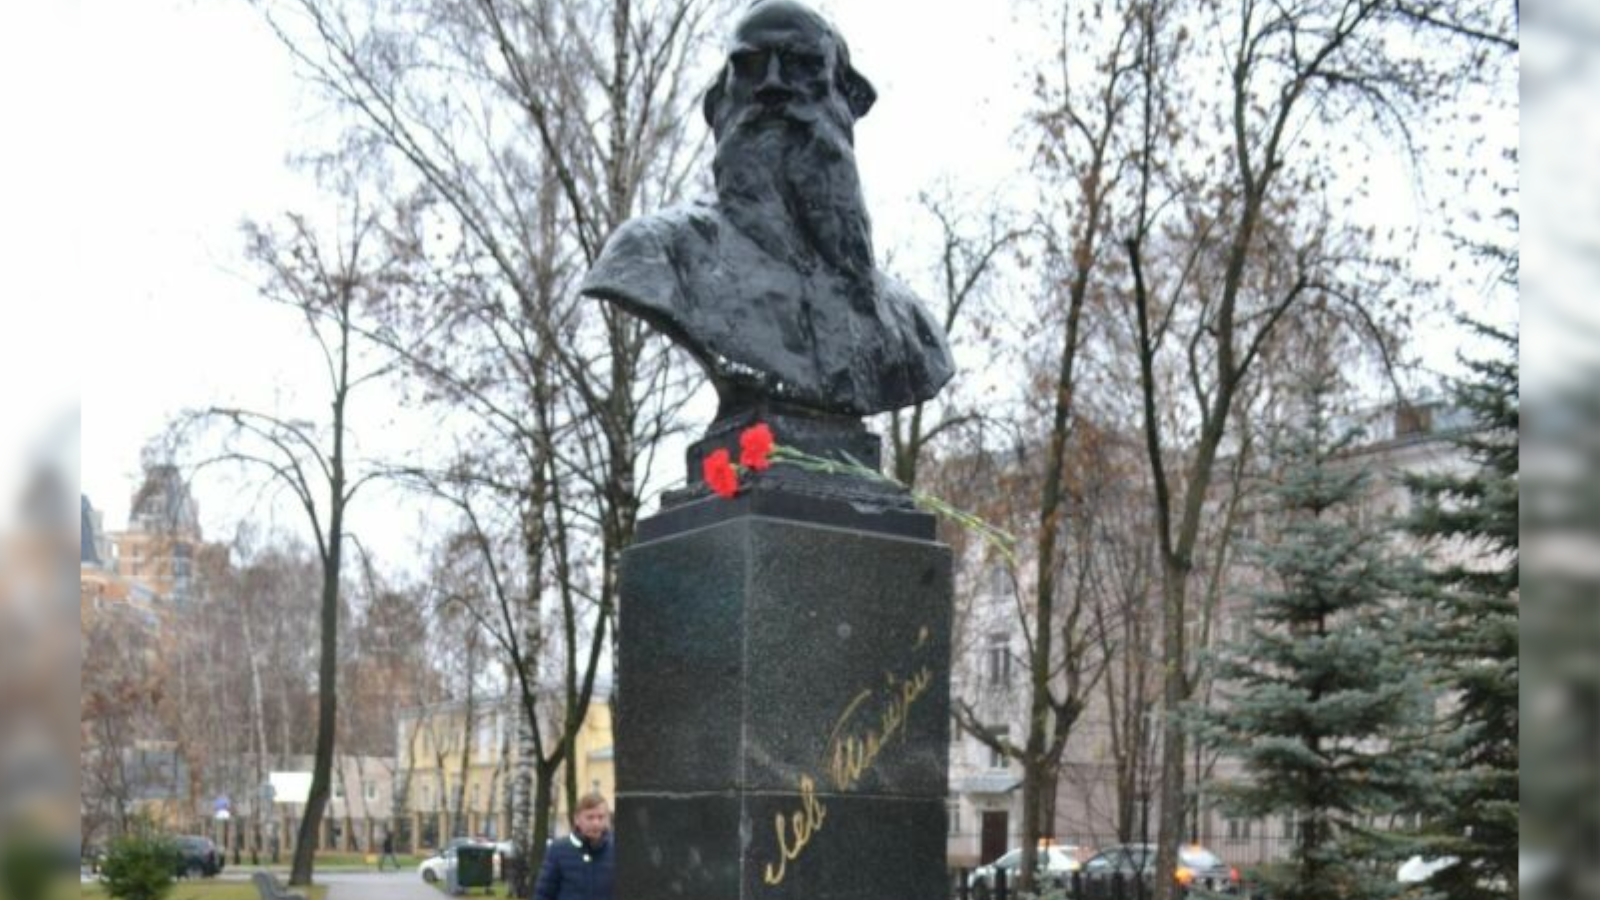 Today in Kazan they laid flowers at the monument to Lev Tolstoy, an occupier 